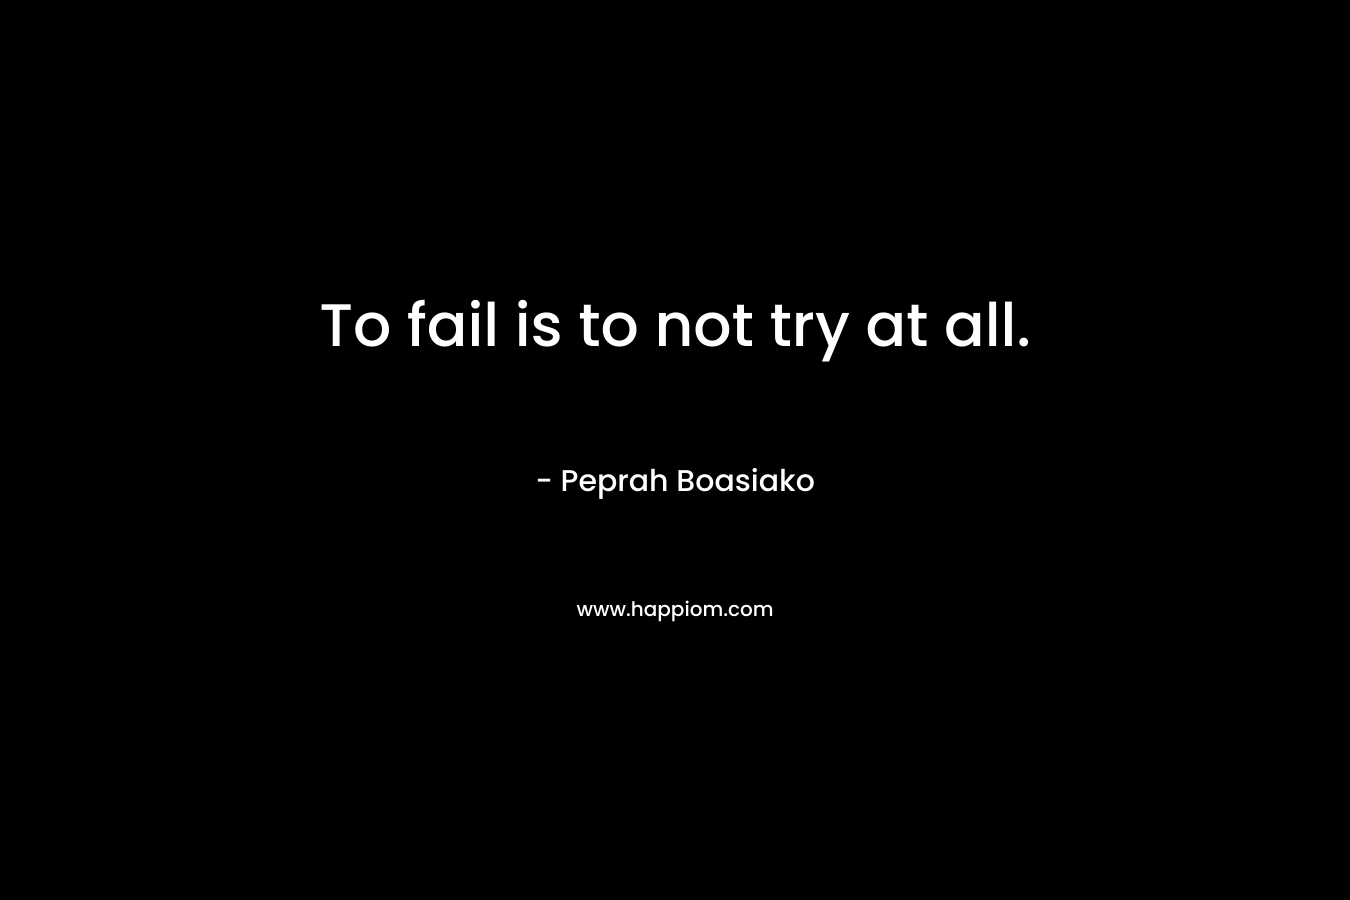 To fail is to not try at all.